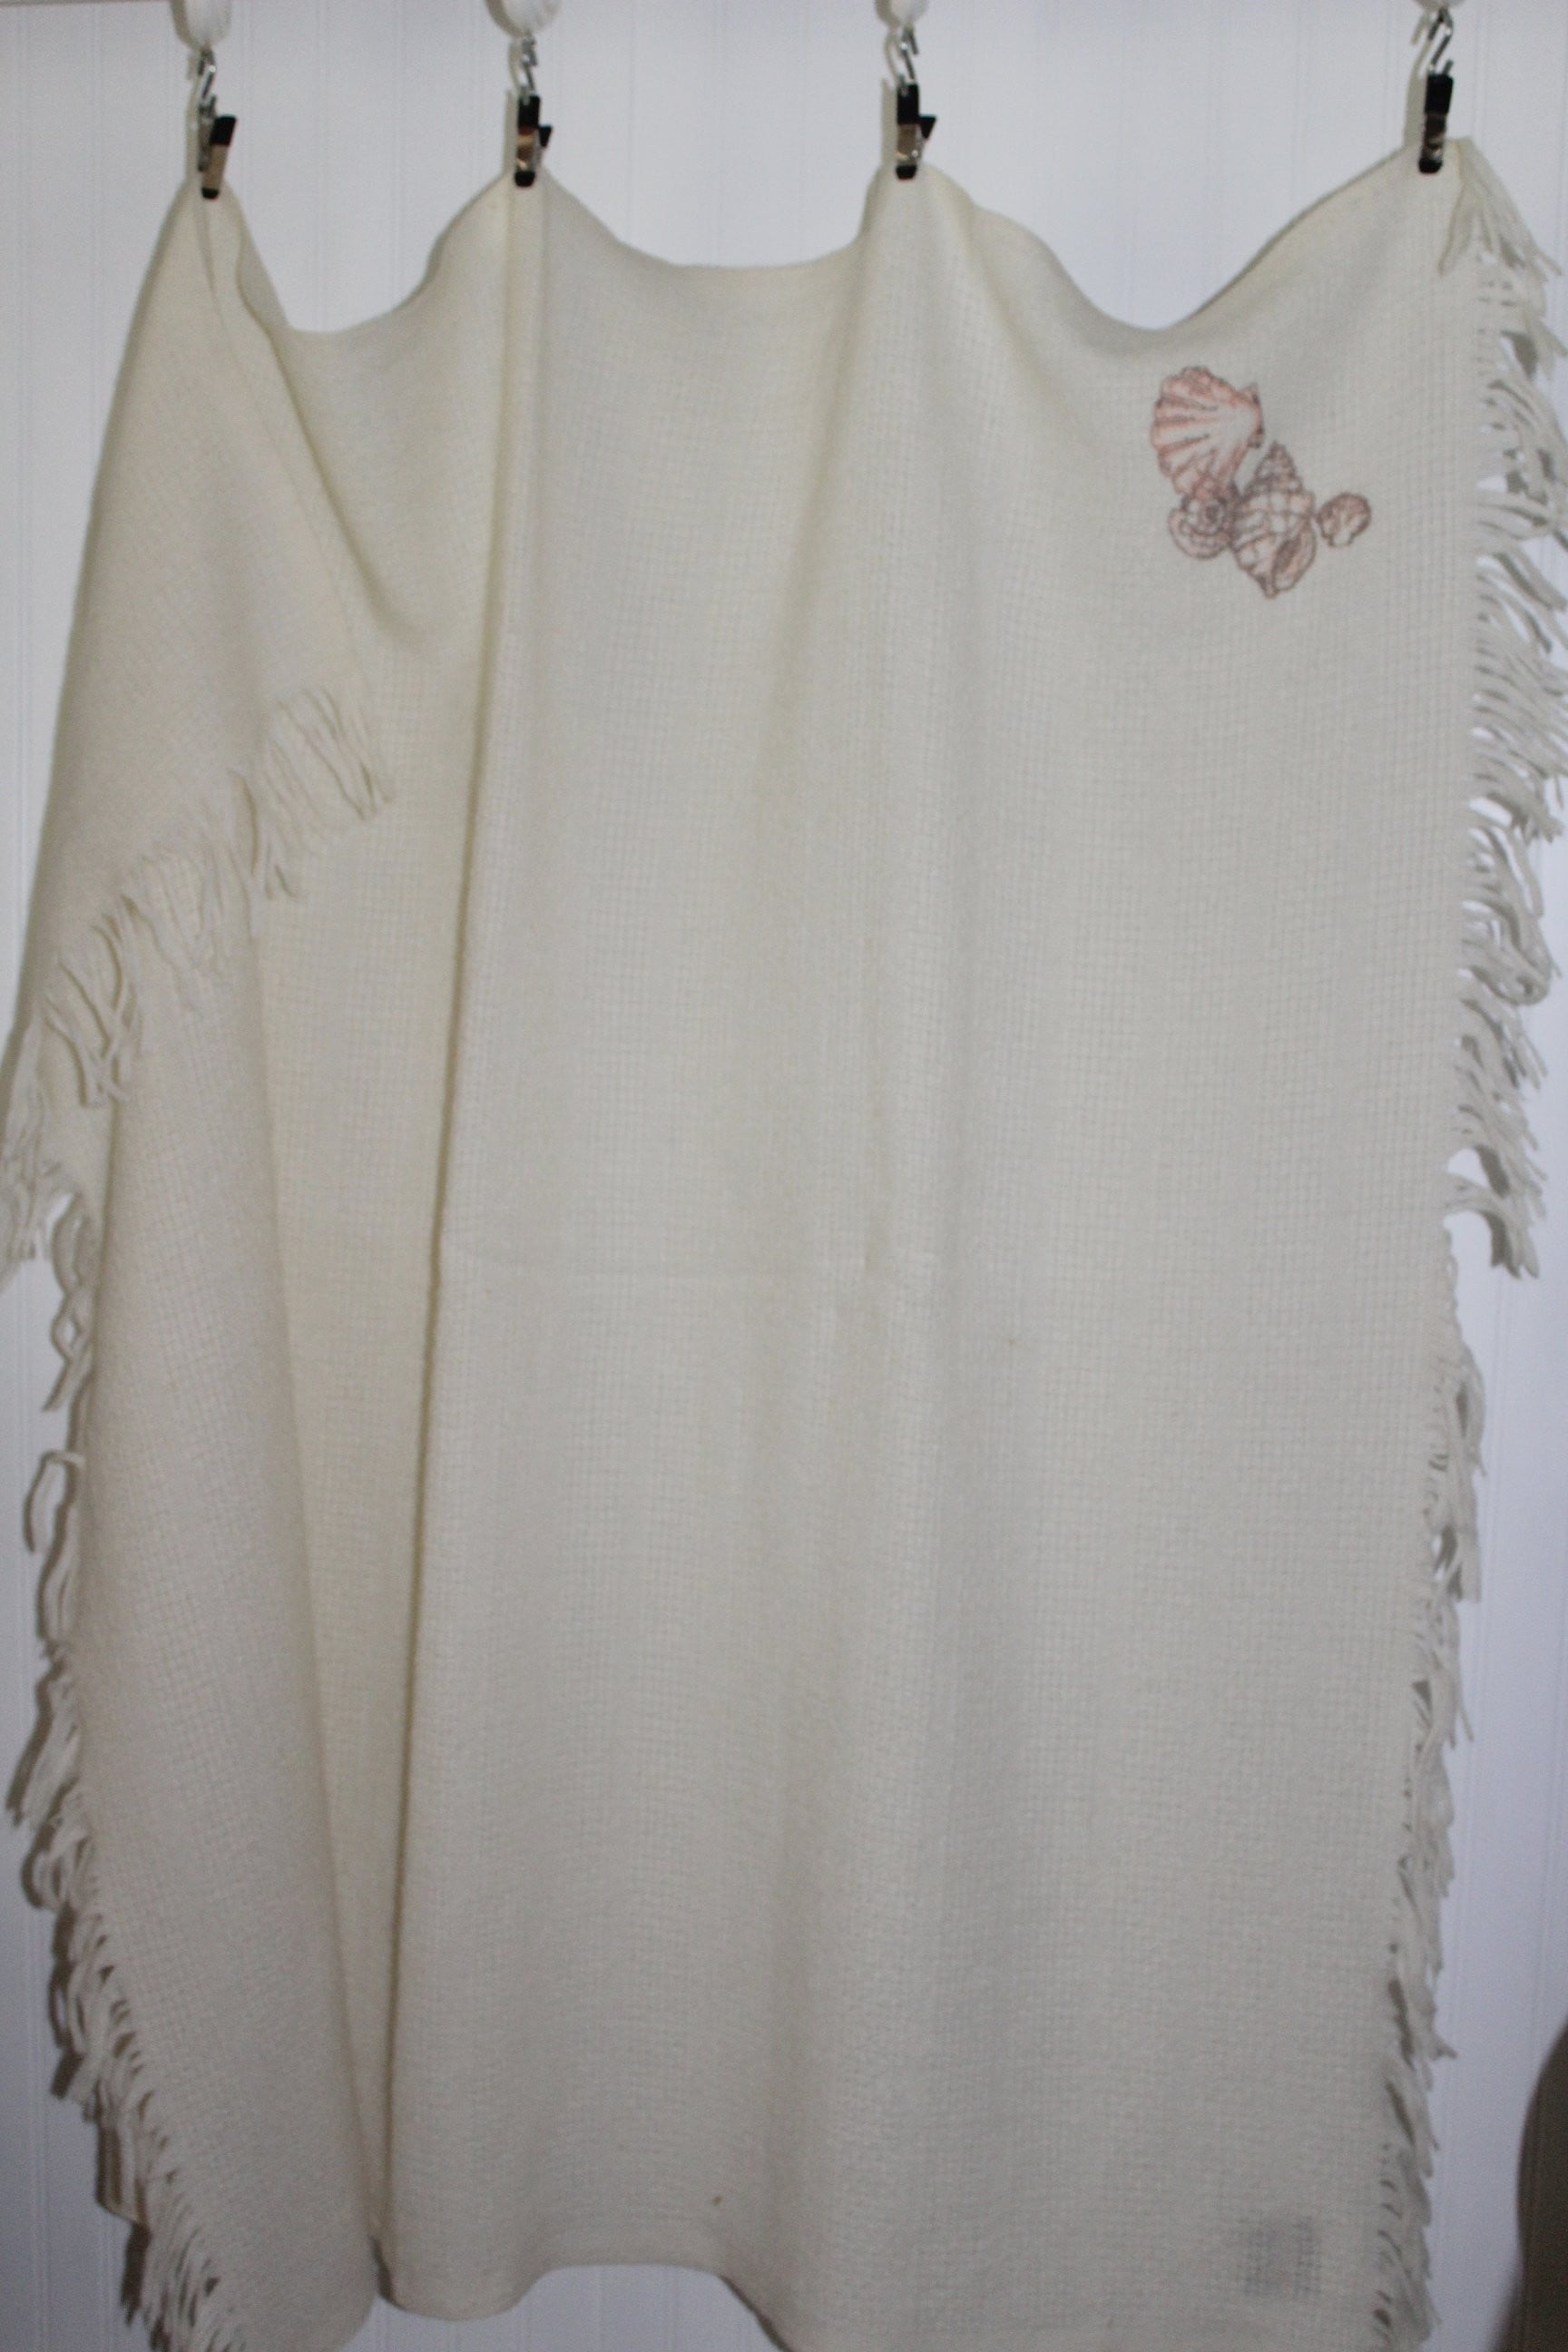 Collectible FARIBO Fringed Throw Ivory Wool Blend Seashell Embroidered Vintage rare